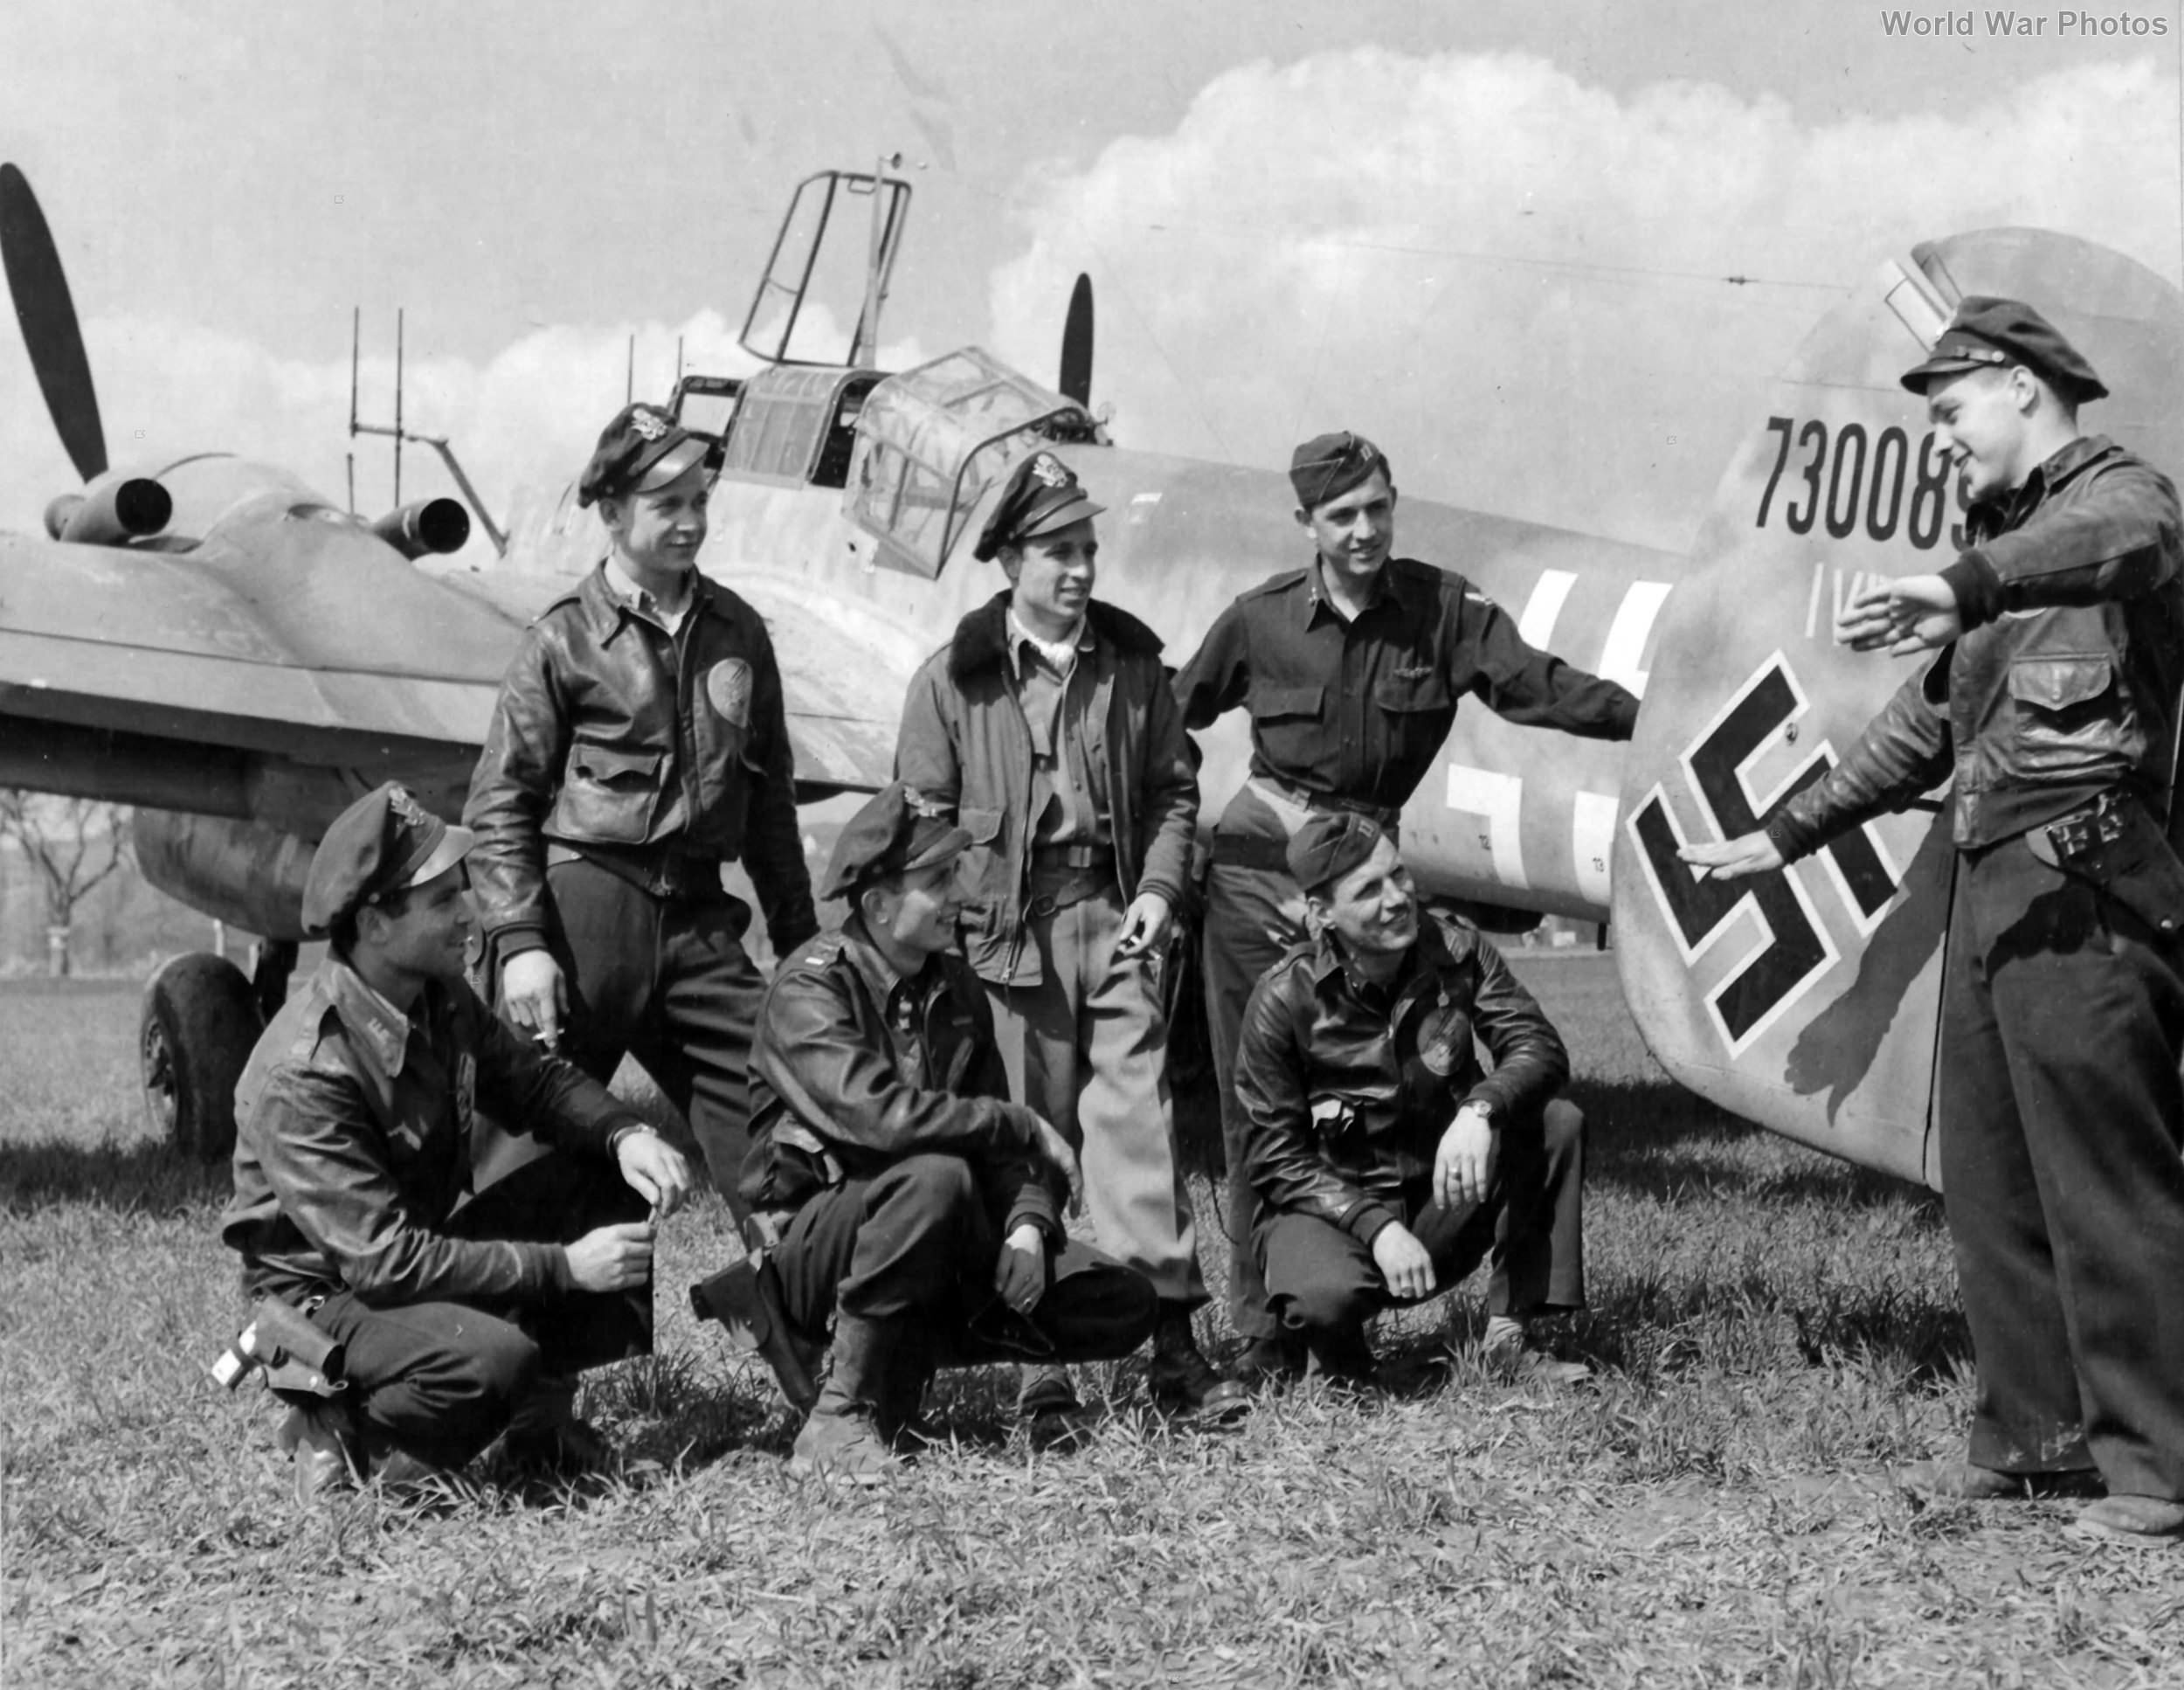 Captured Bf 110G-4 730089 and pilots from 365th FG